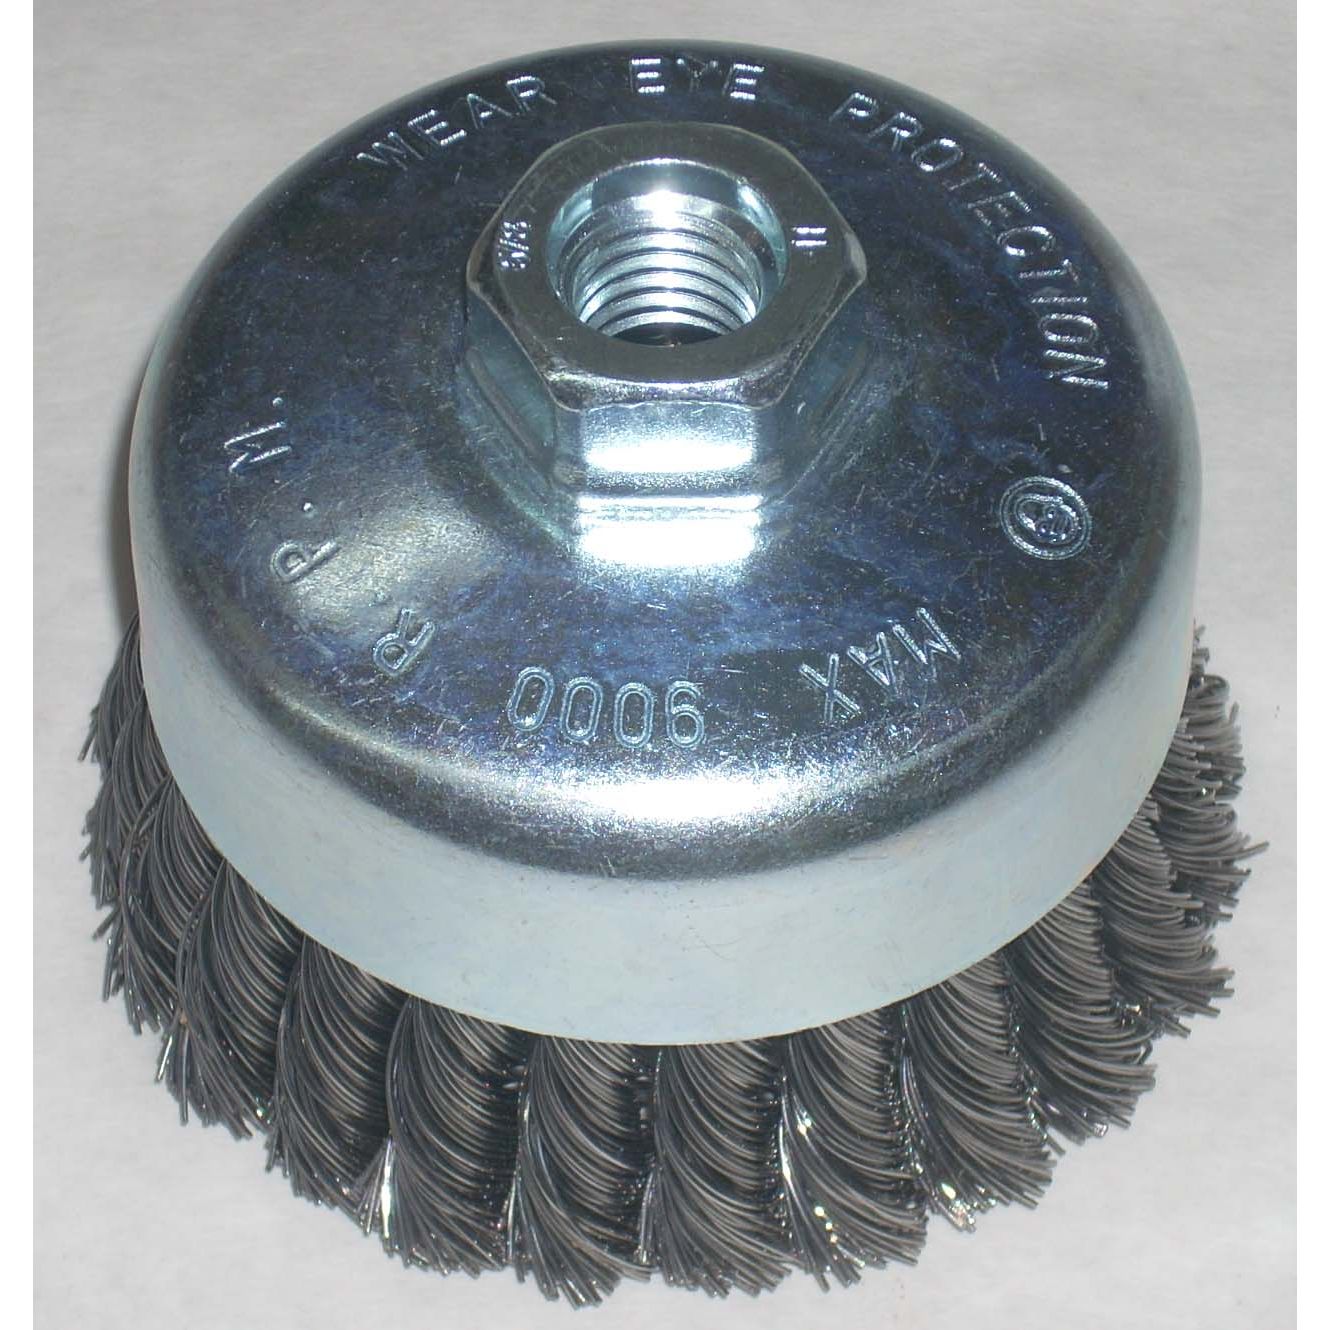 4 x 5/8-11 Steel Knot Cup Brush .020 Wire